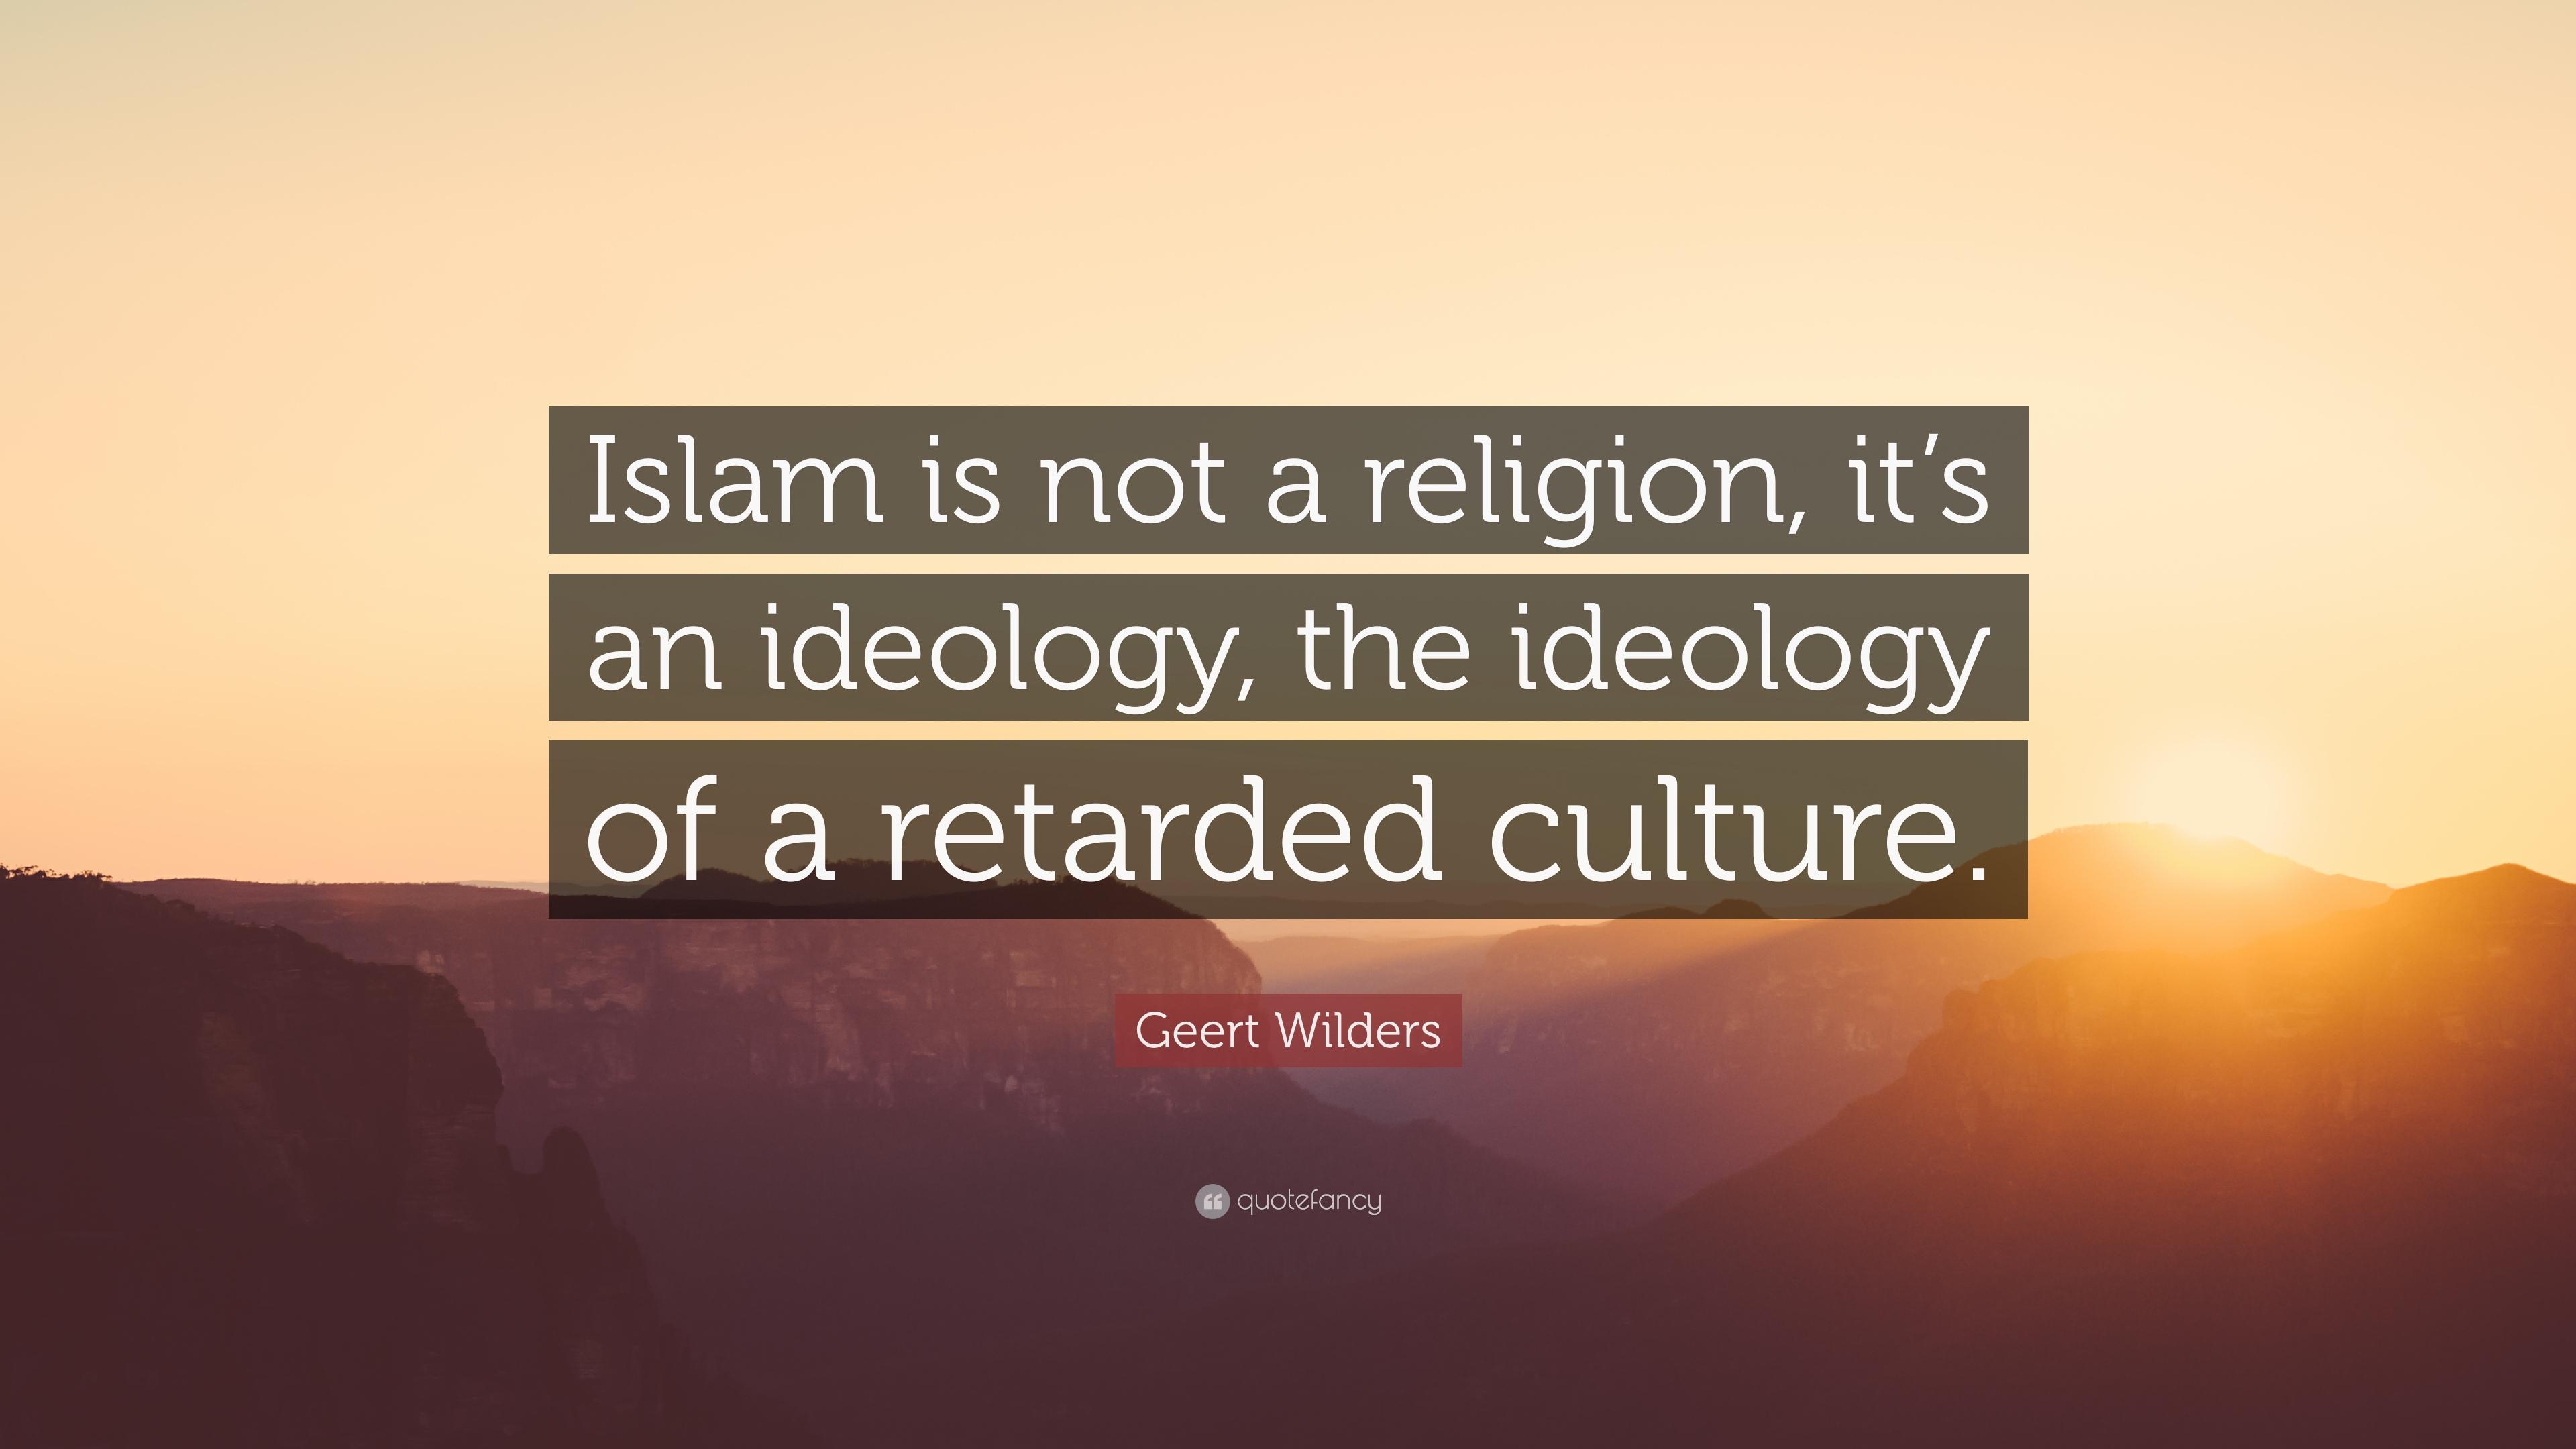 Geert Wilders Quote: “Islam is not a religion, it's an ideology